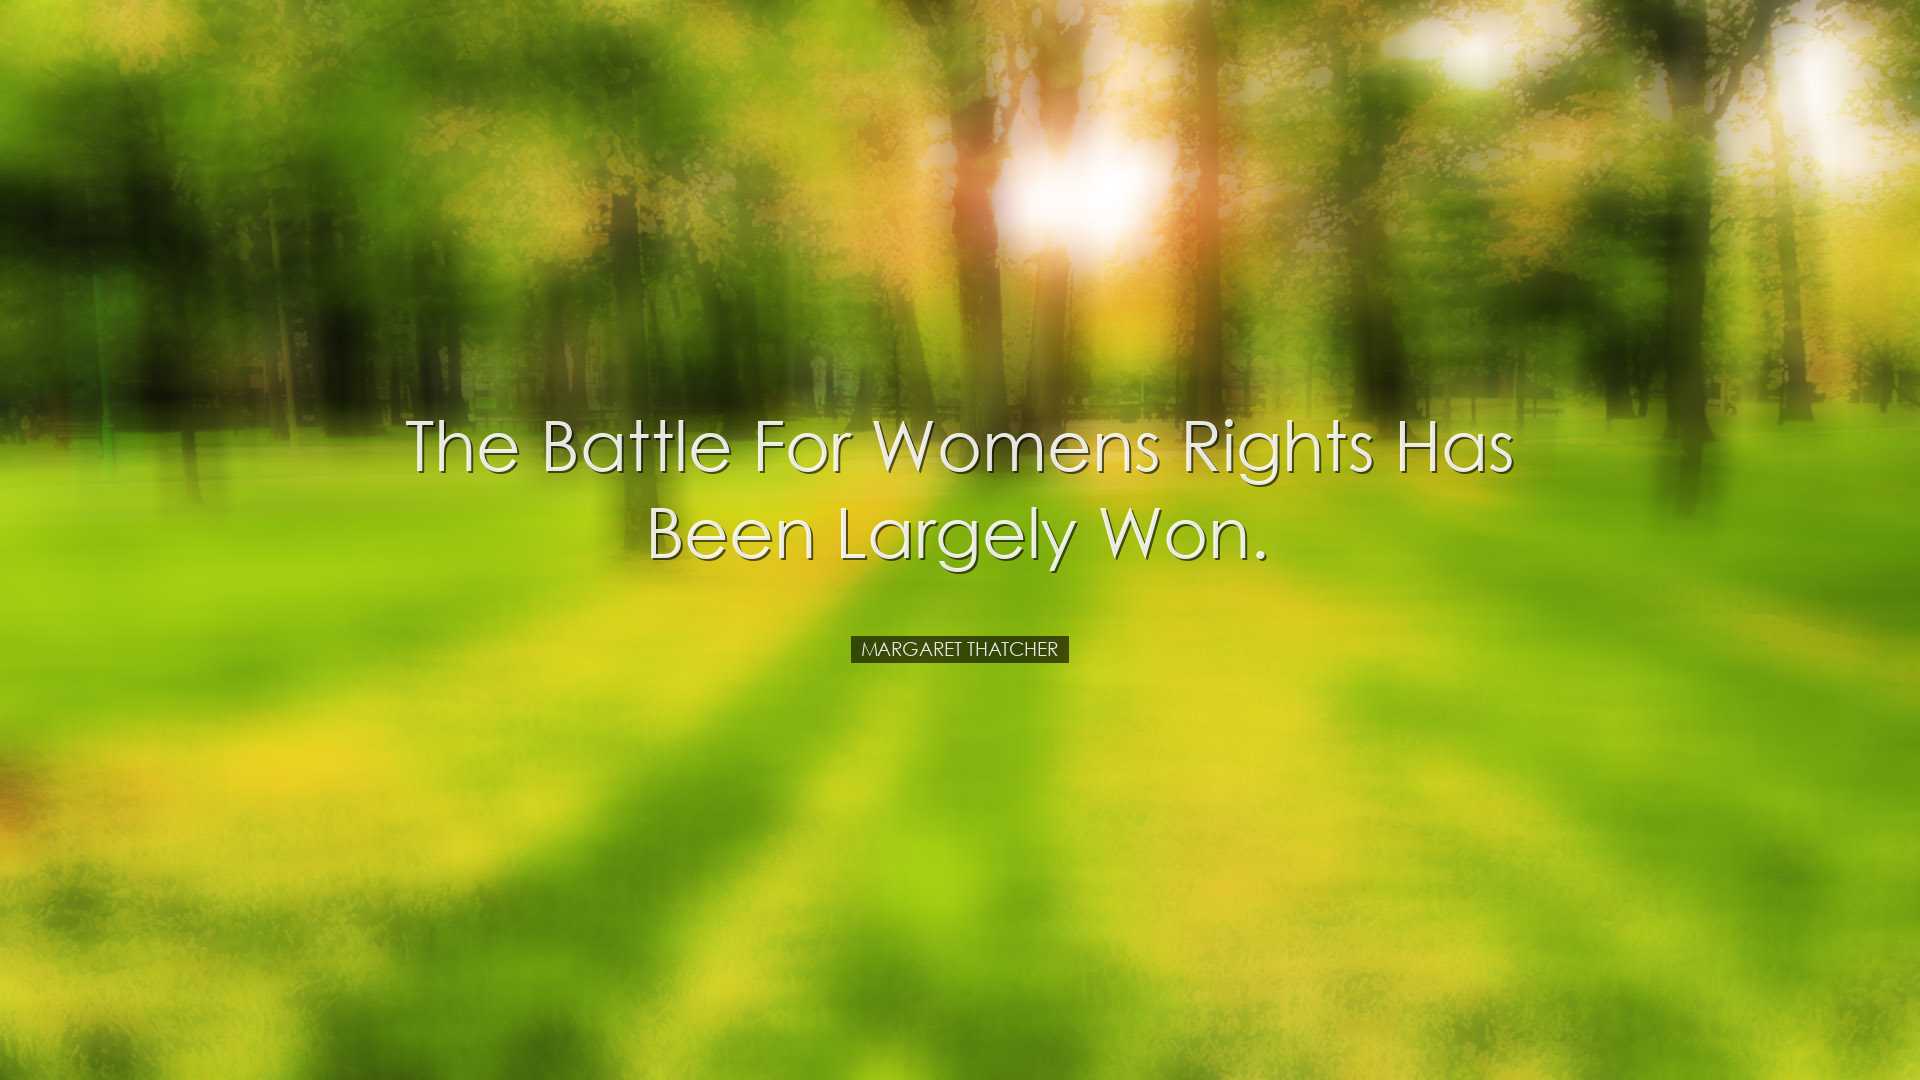 The battle for womens rights has been largely won. - Margaret That